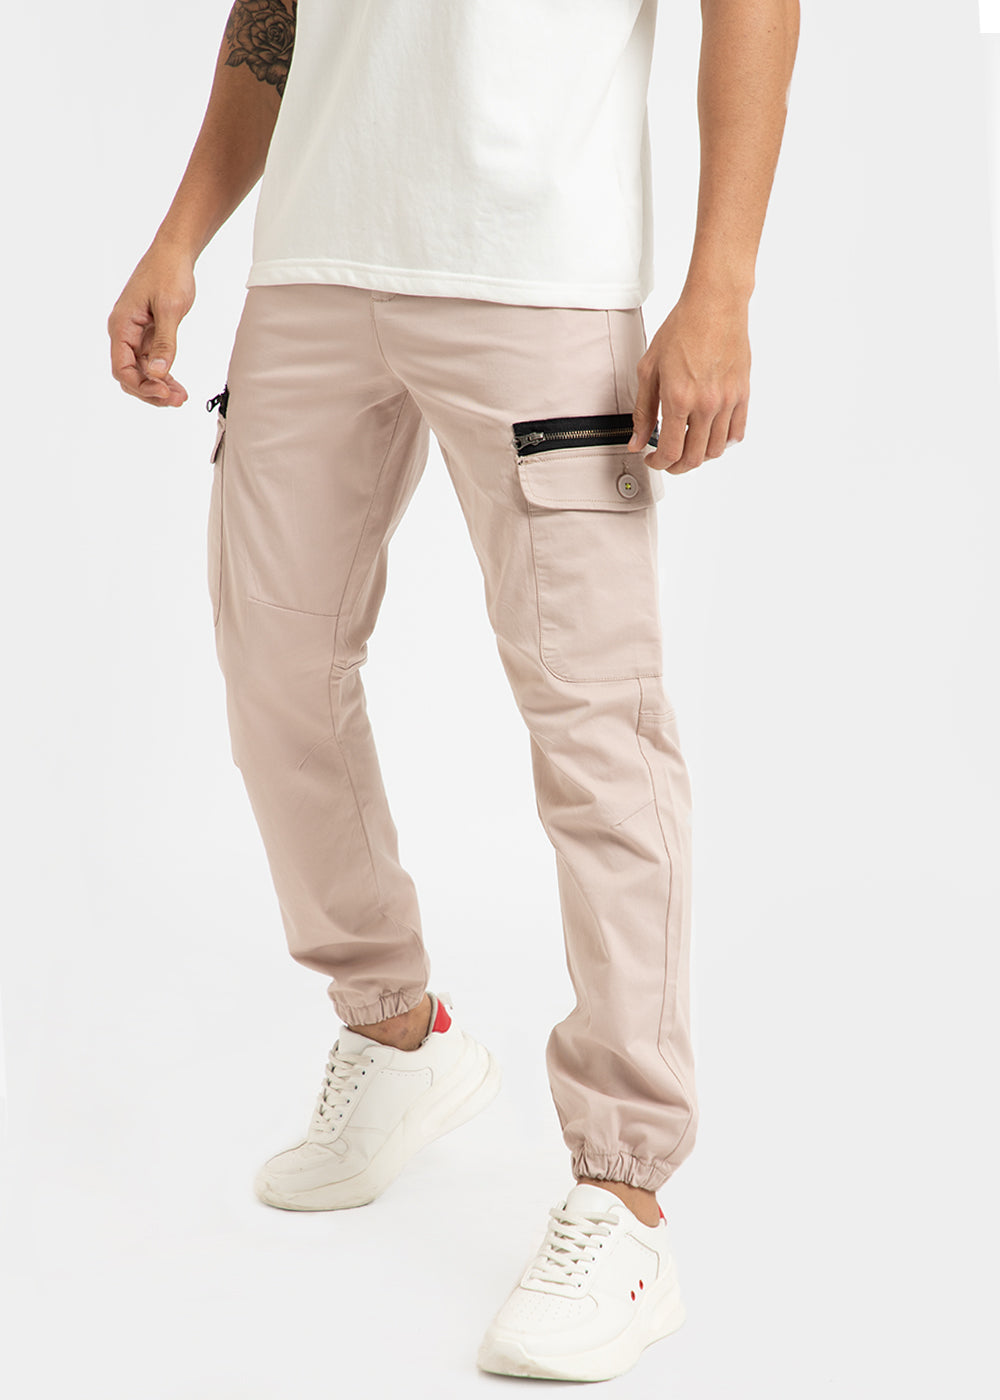 Lightweight Mens Tactical Tan Cargo Pants Mens For Outdoor Sports, Hiking,  And Jogging With Multi Pockets From Luote, $18.55 | DHgate.Com